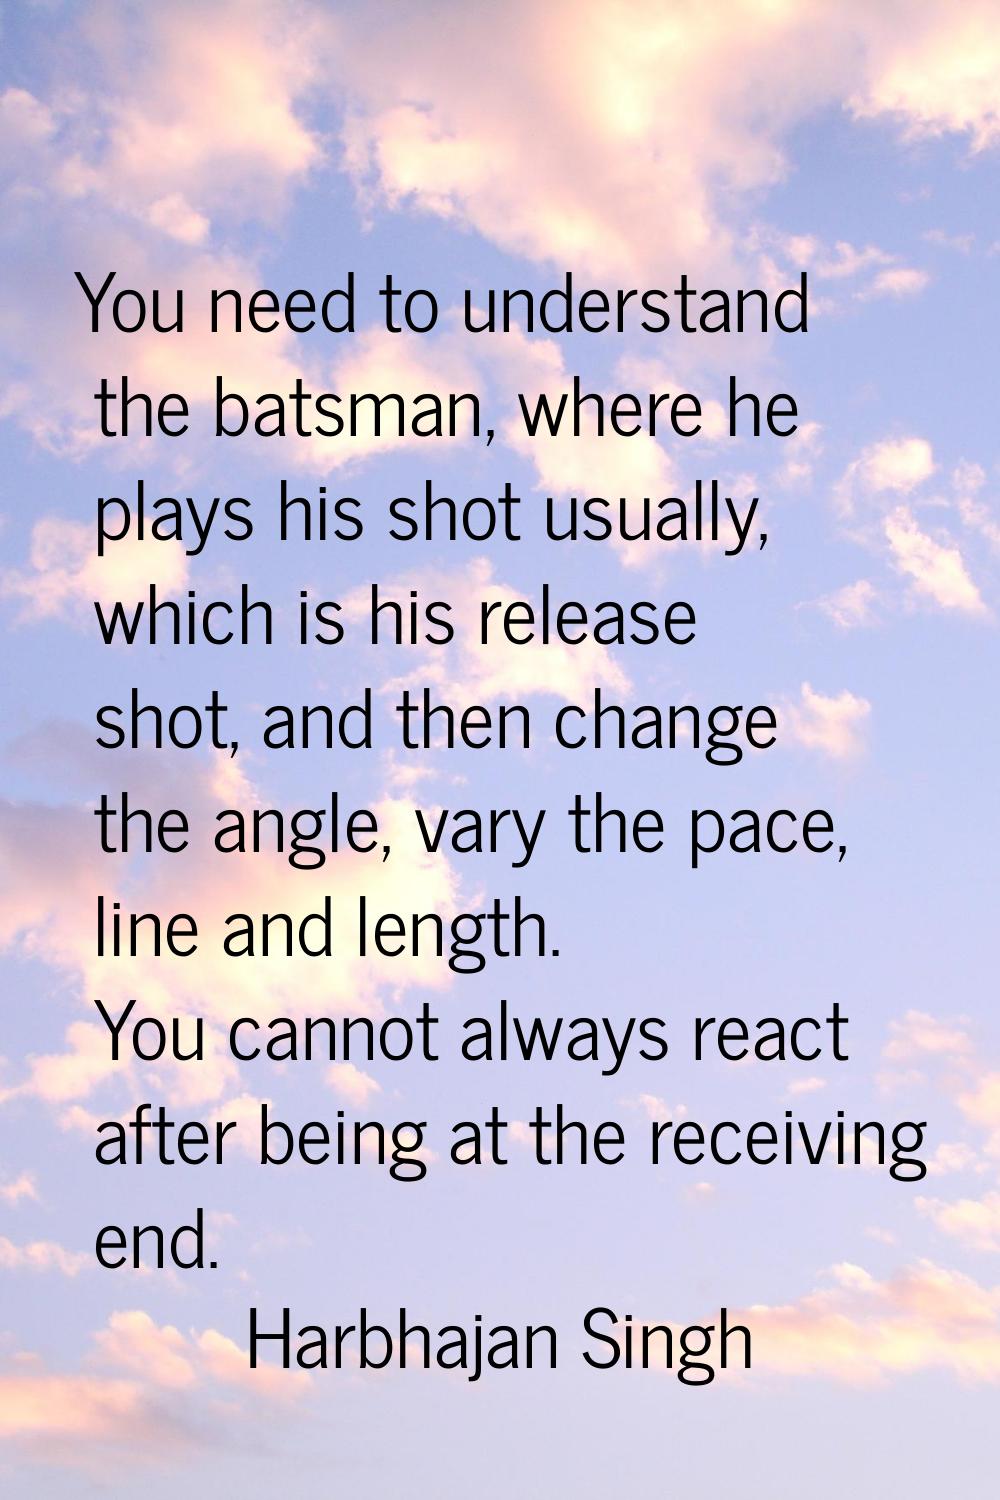 You need to understand the batsman, where he plays his shot usually, which is his release shot, and